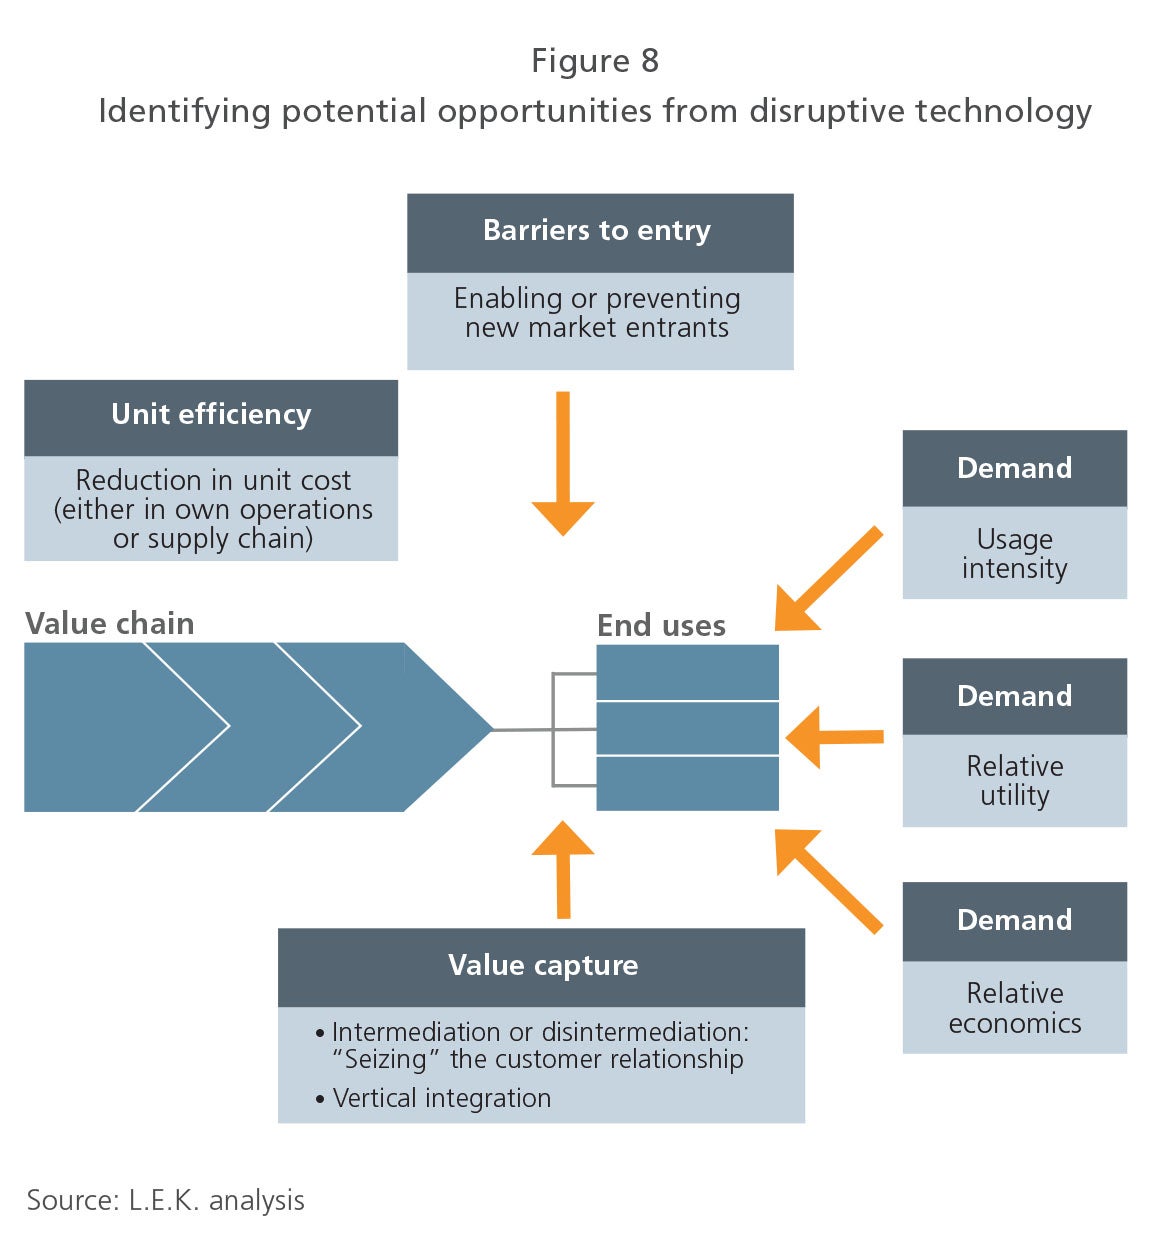 ID potential opportunities from disruptive technology